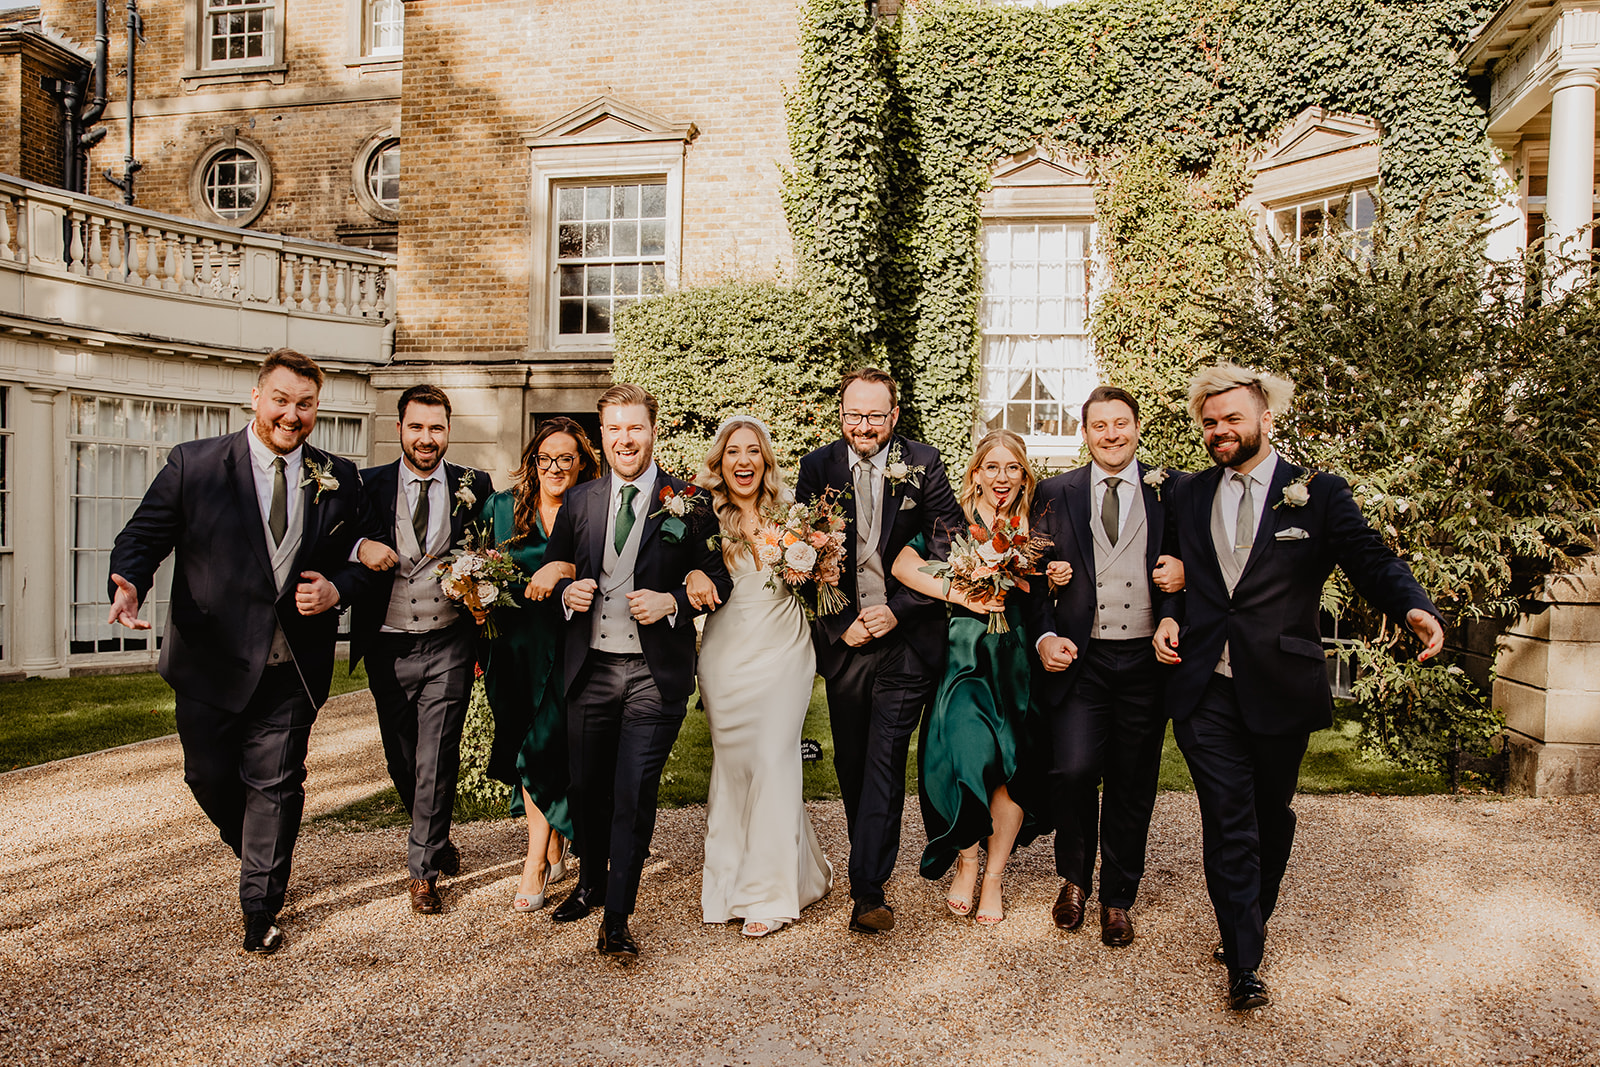 Wedding party at a Hampton Court House Wedding. By Olive Joy Photography